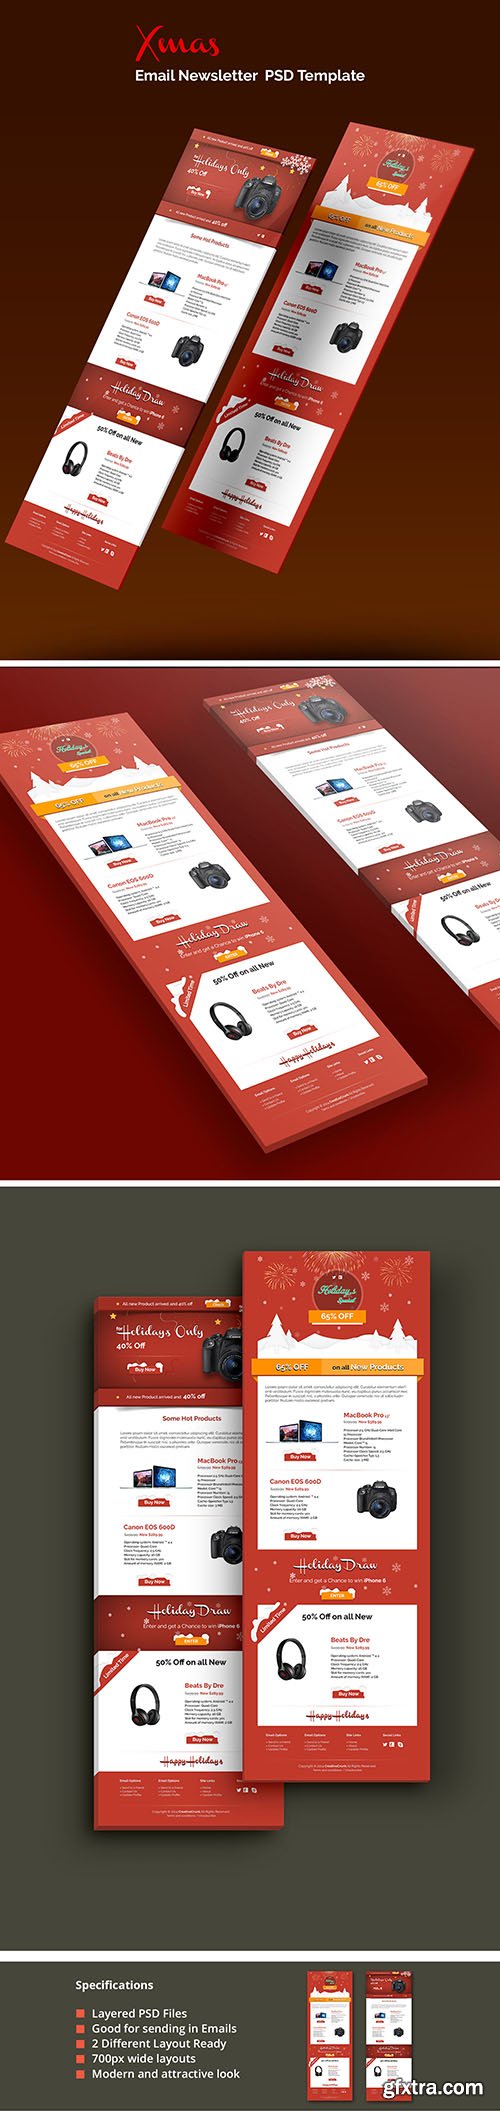 PSD Web Template - Xmas - Email Newsletter Theme